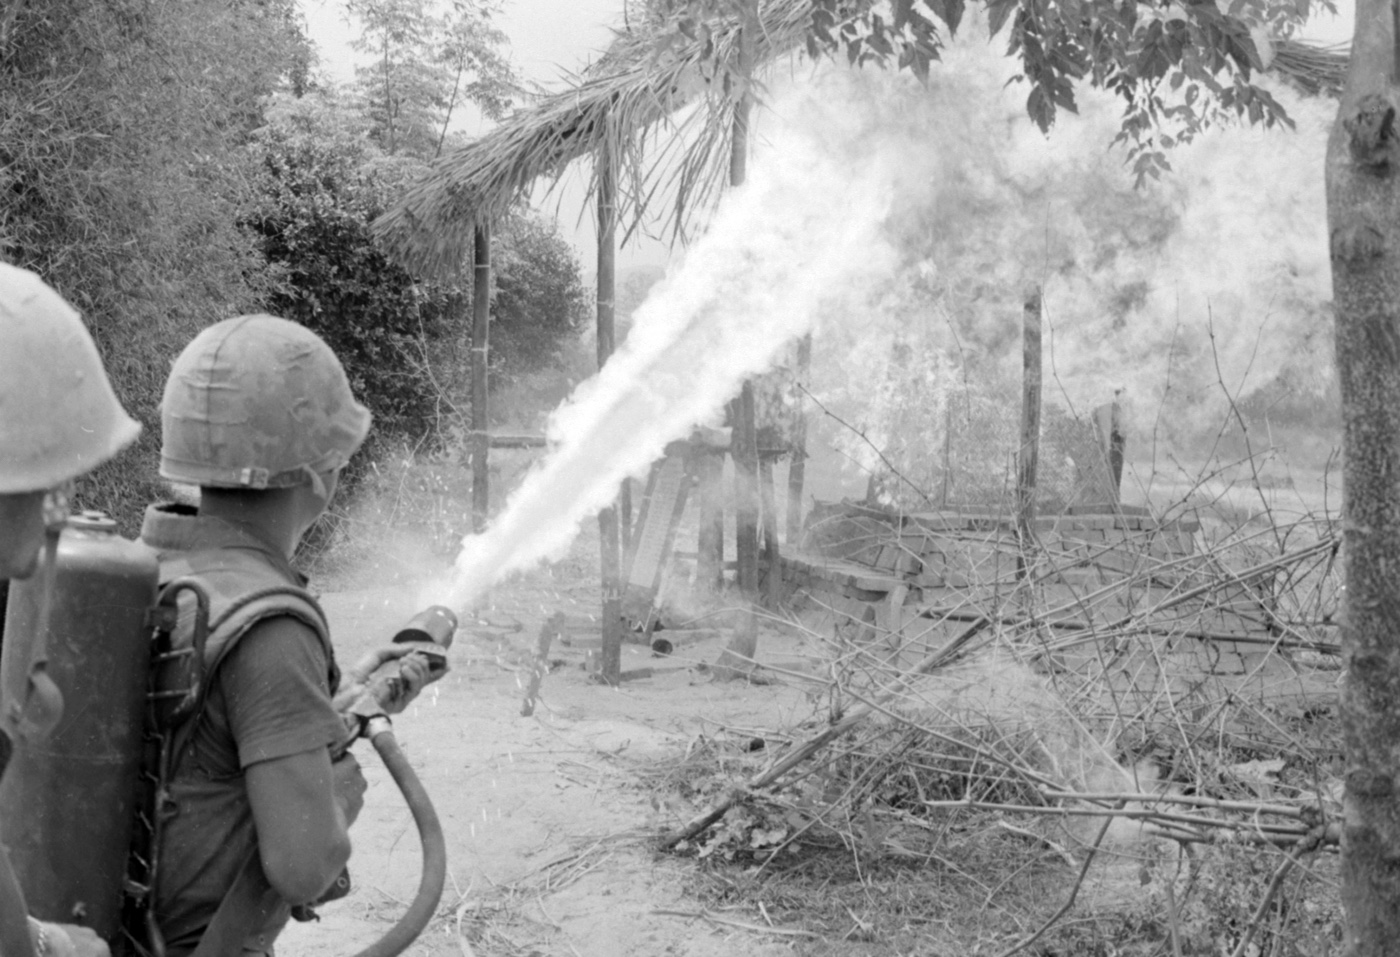 m9a1 used by marines in vietnam